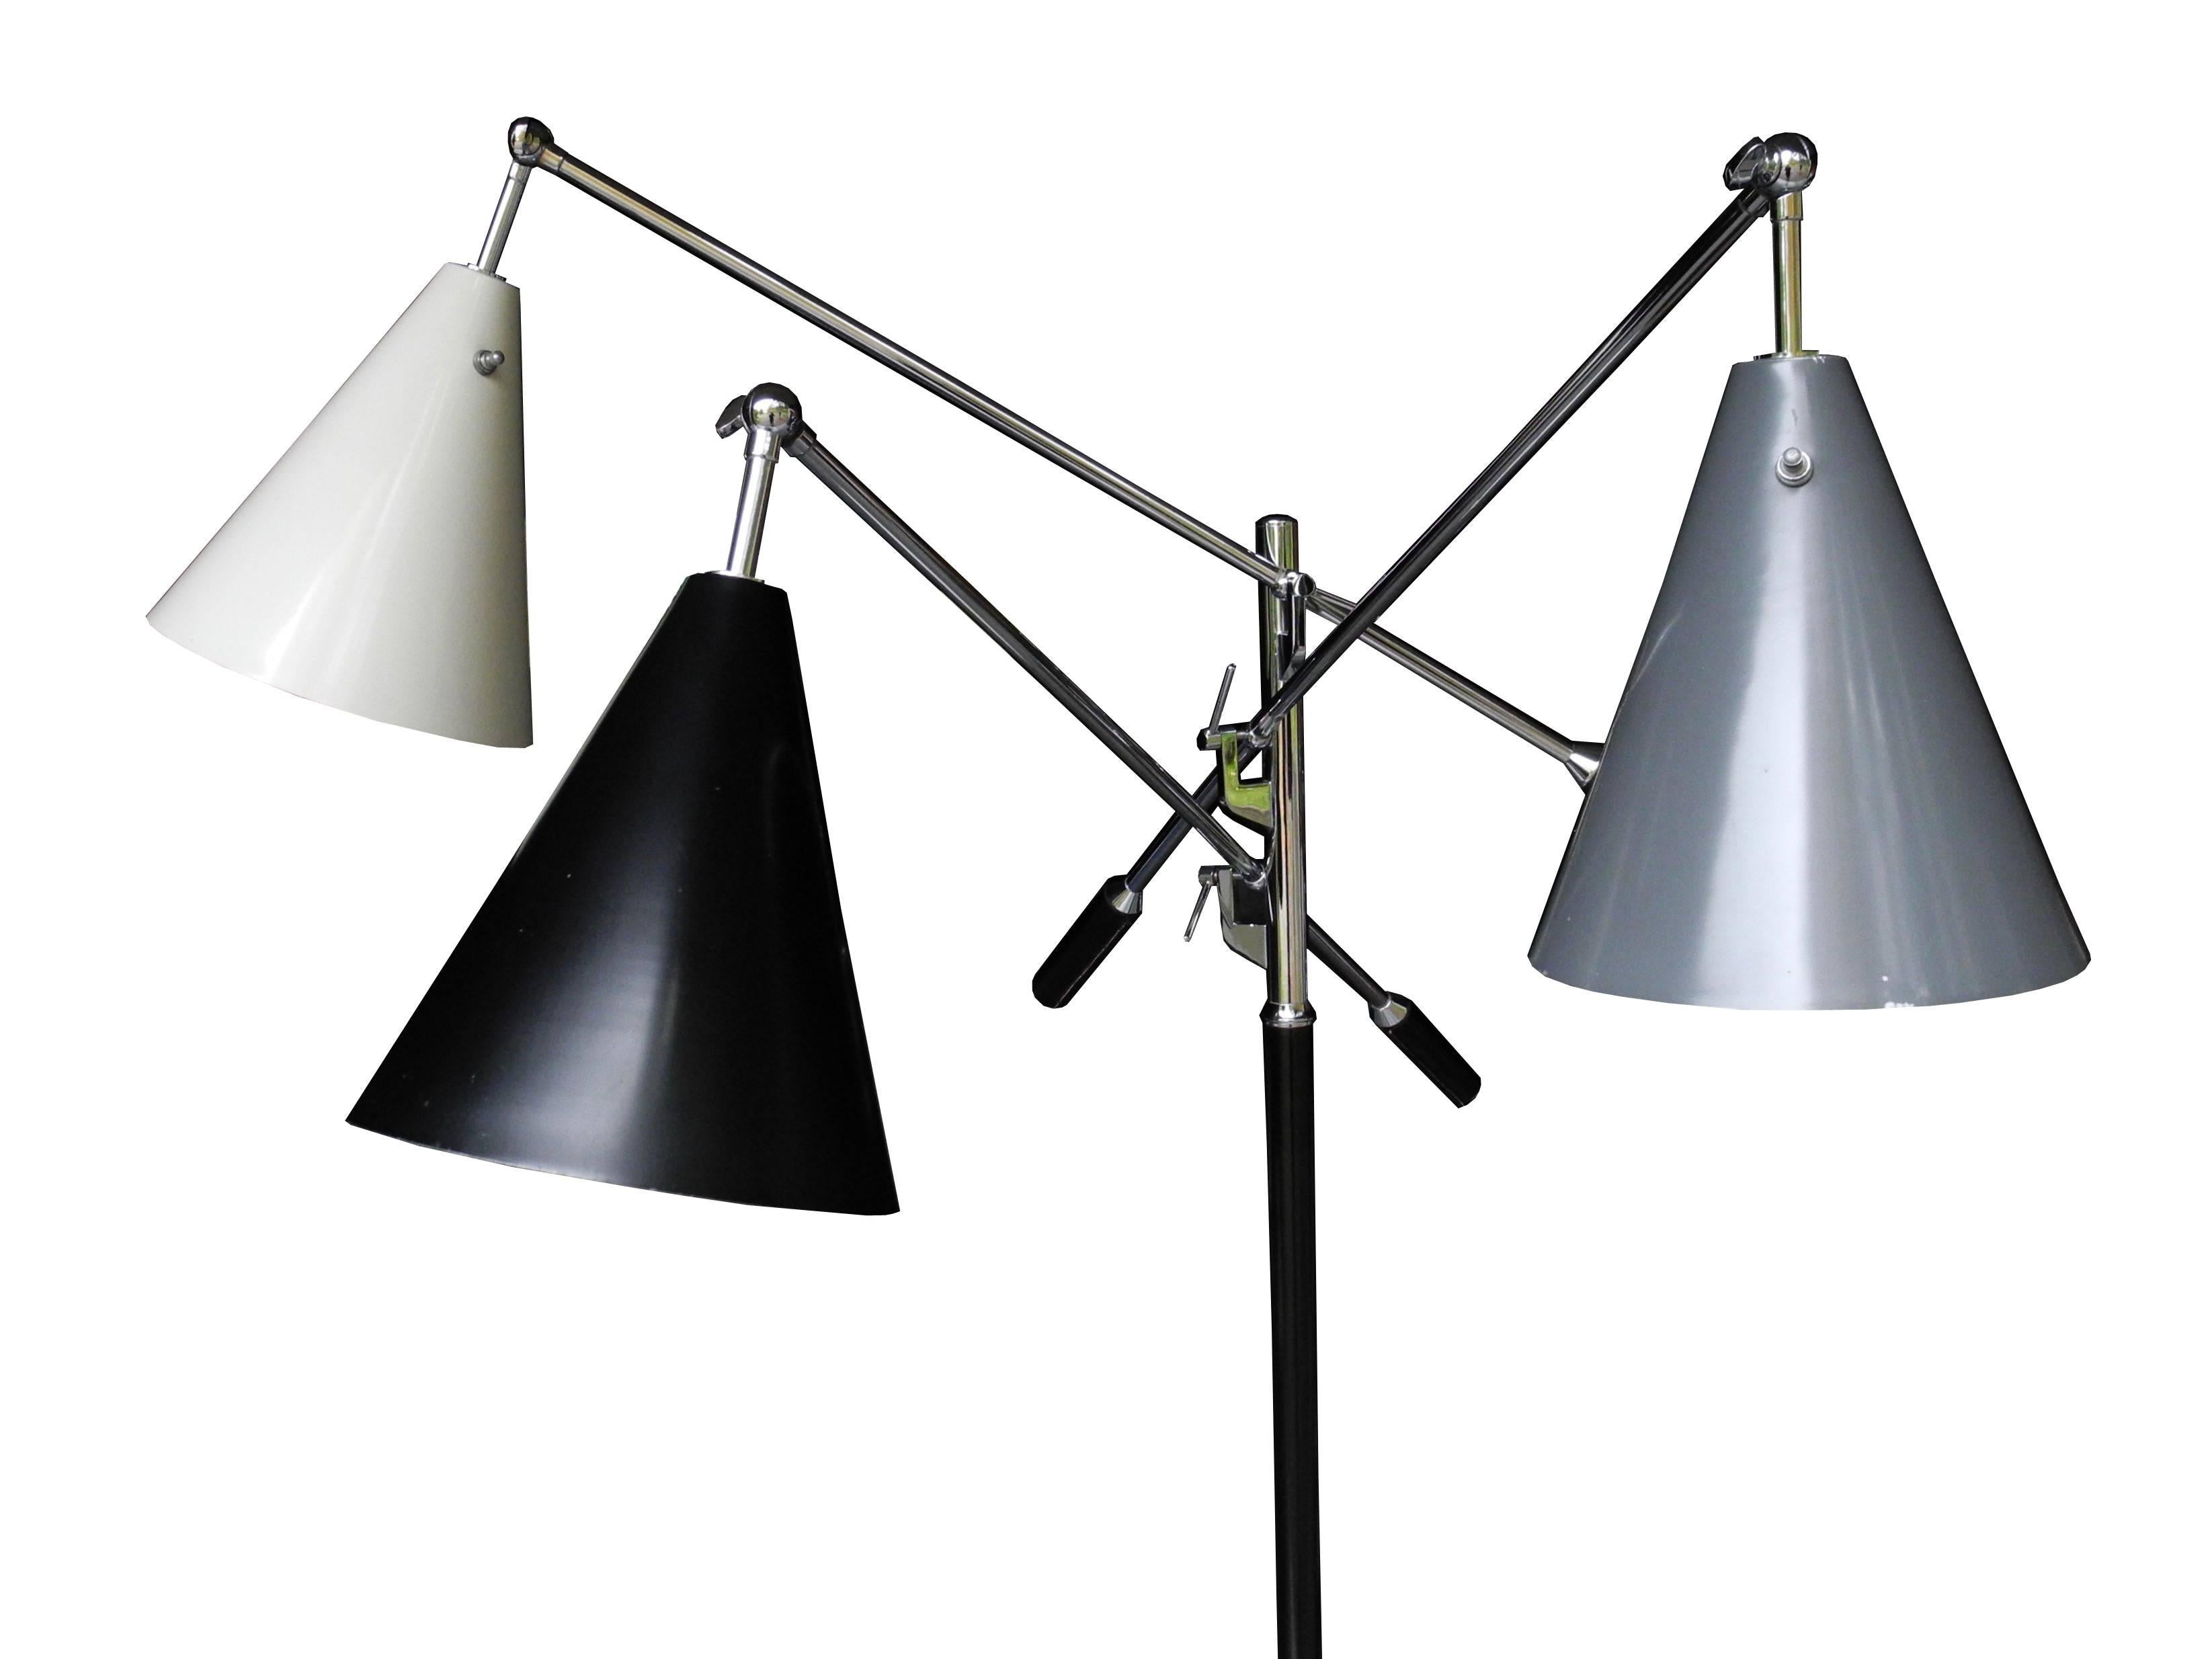 This three-arm, chrome and leather with marble base, floor lamp has adjustable arms and adjustable shades. The shades are spun aluminium all in original condition, black white and gray. The sockets have new wire. Measurements fluctuate according to